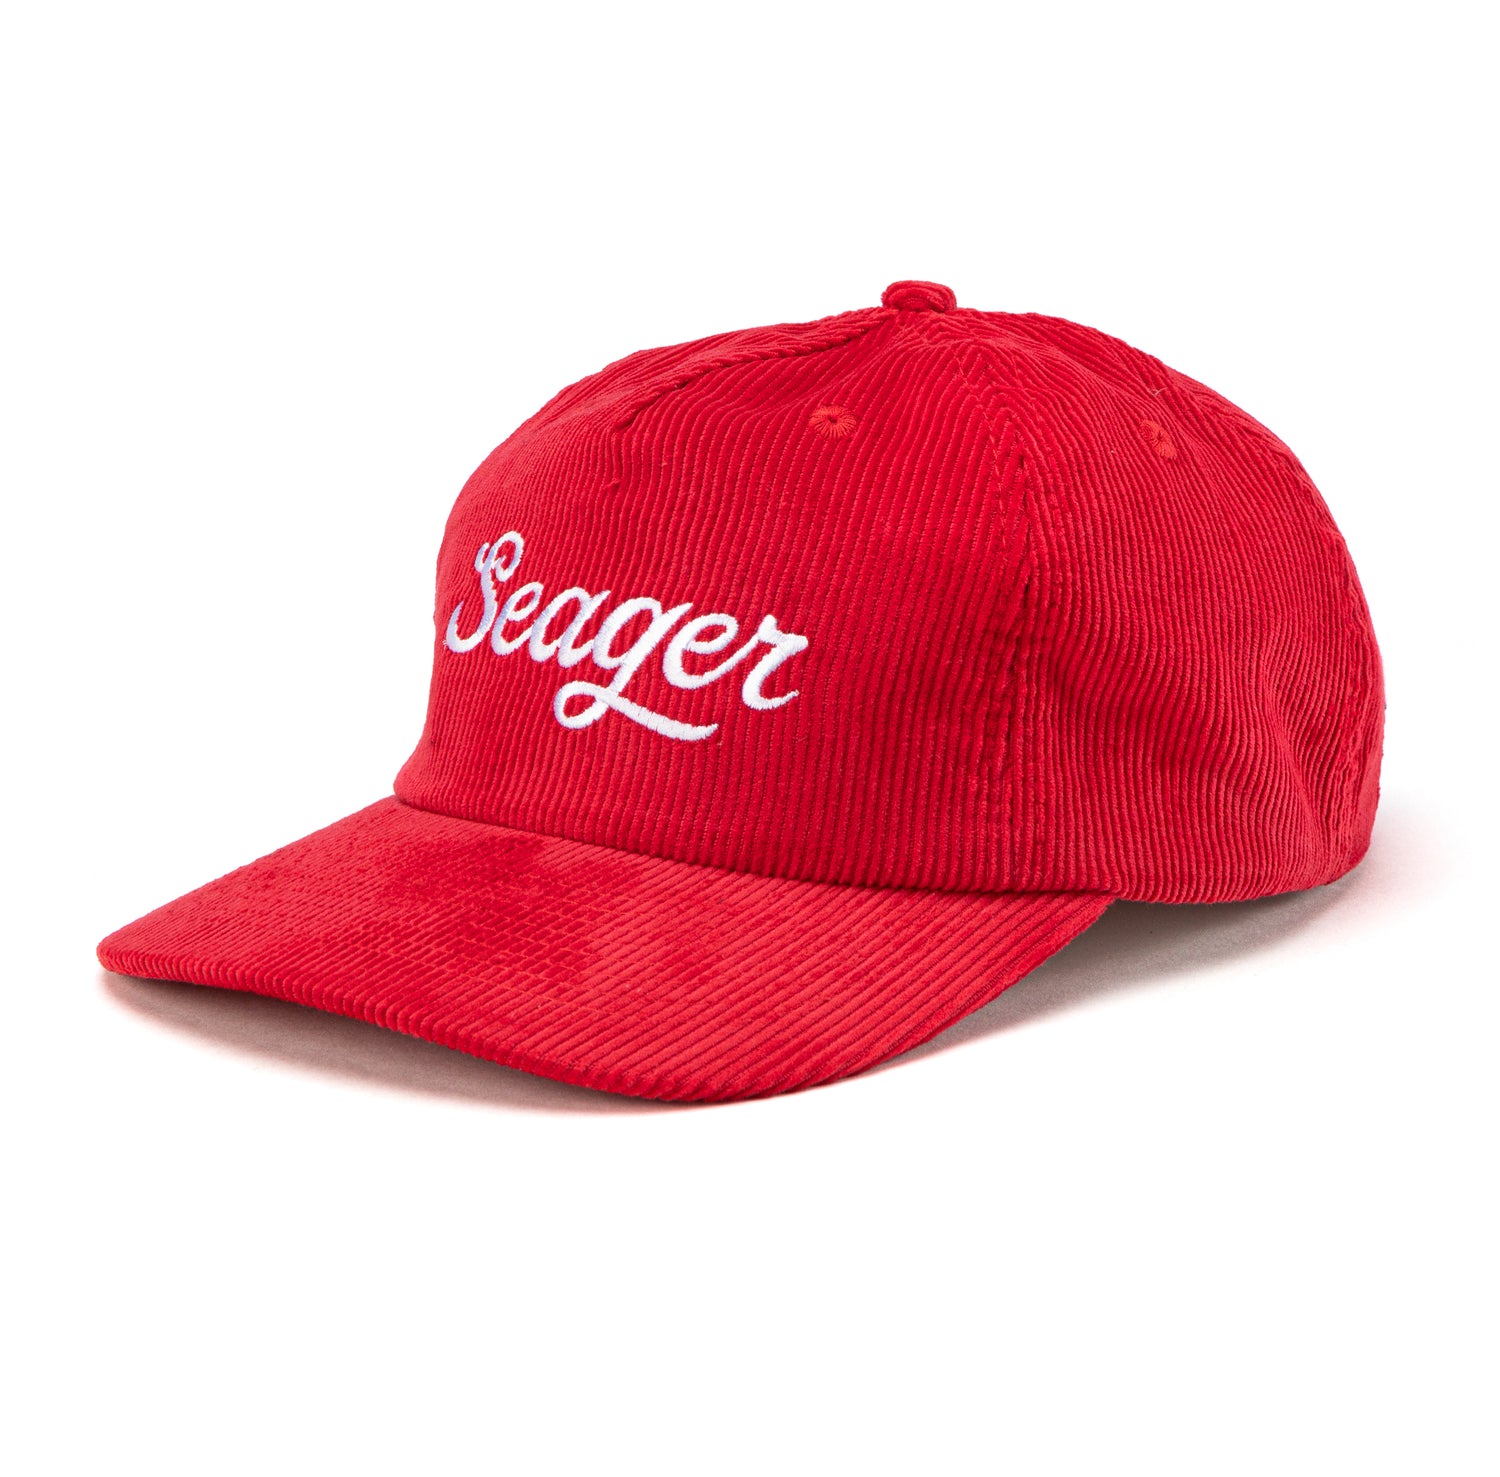 Big Red Corduroy Snapback | Seager Co.